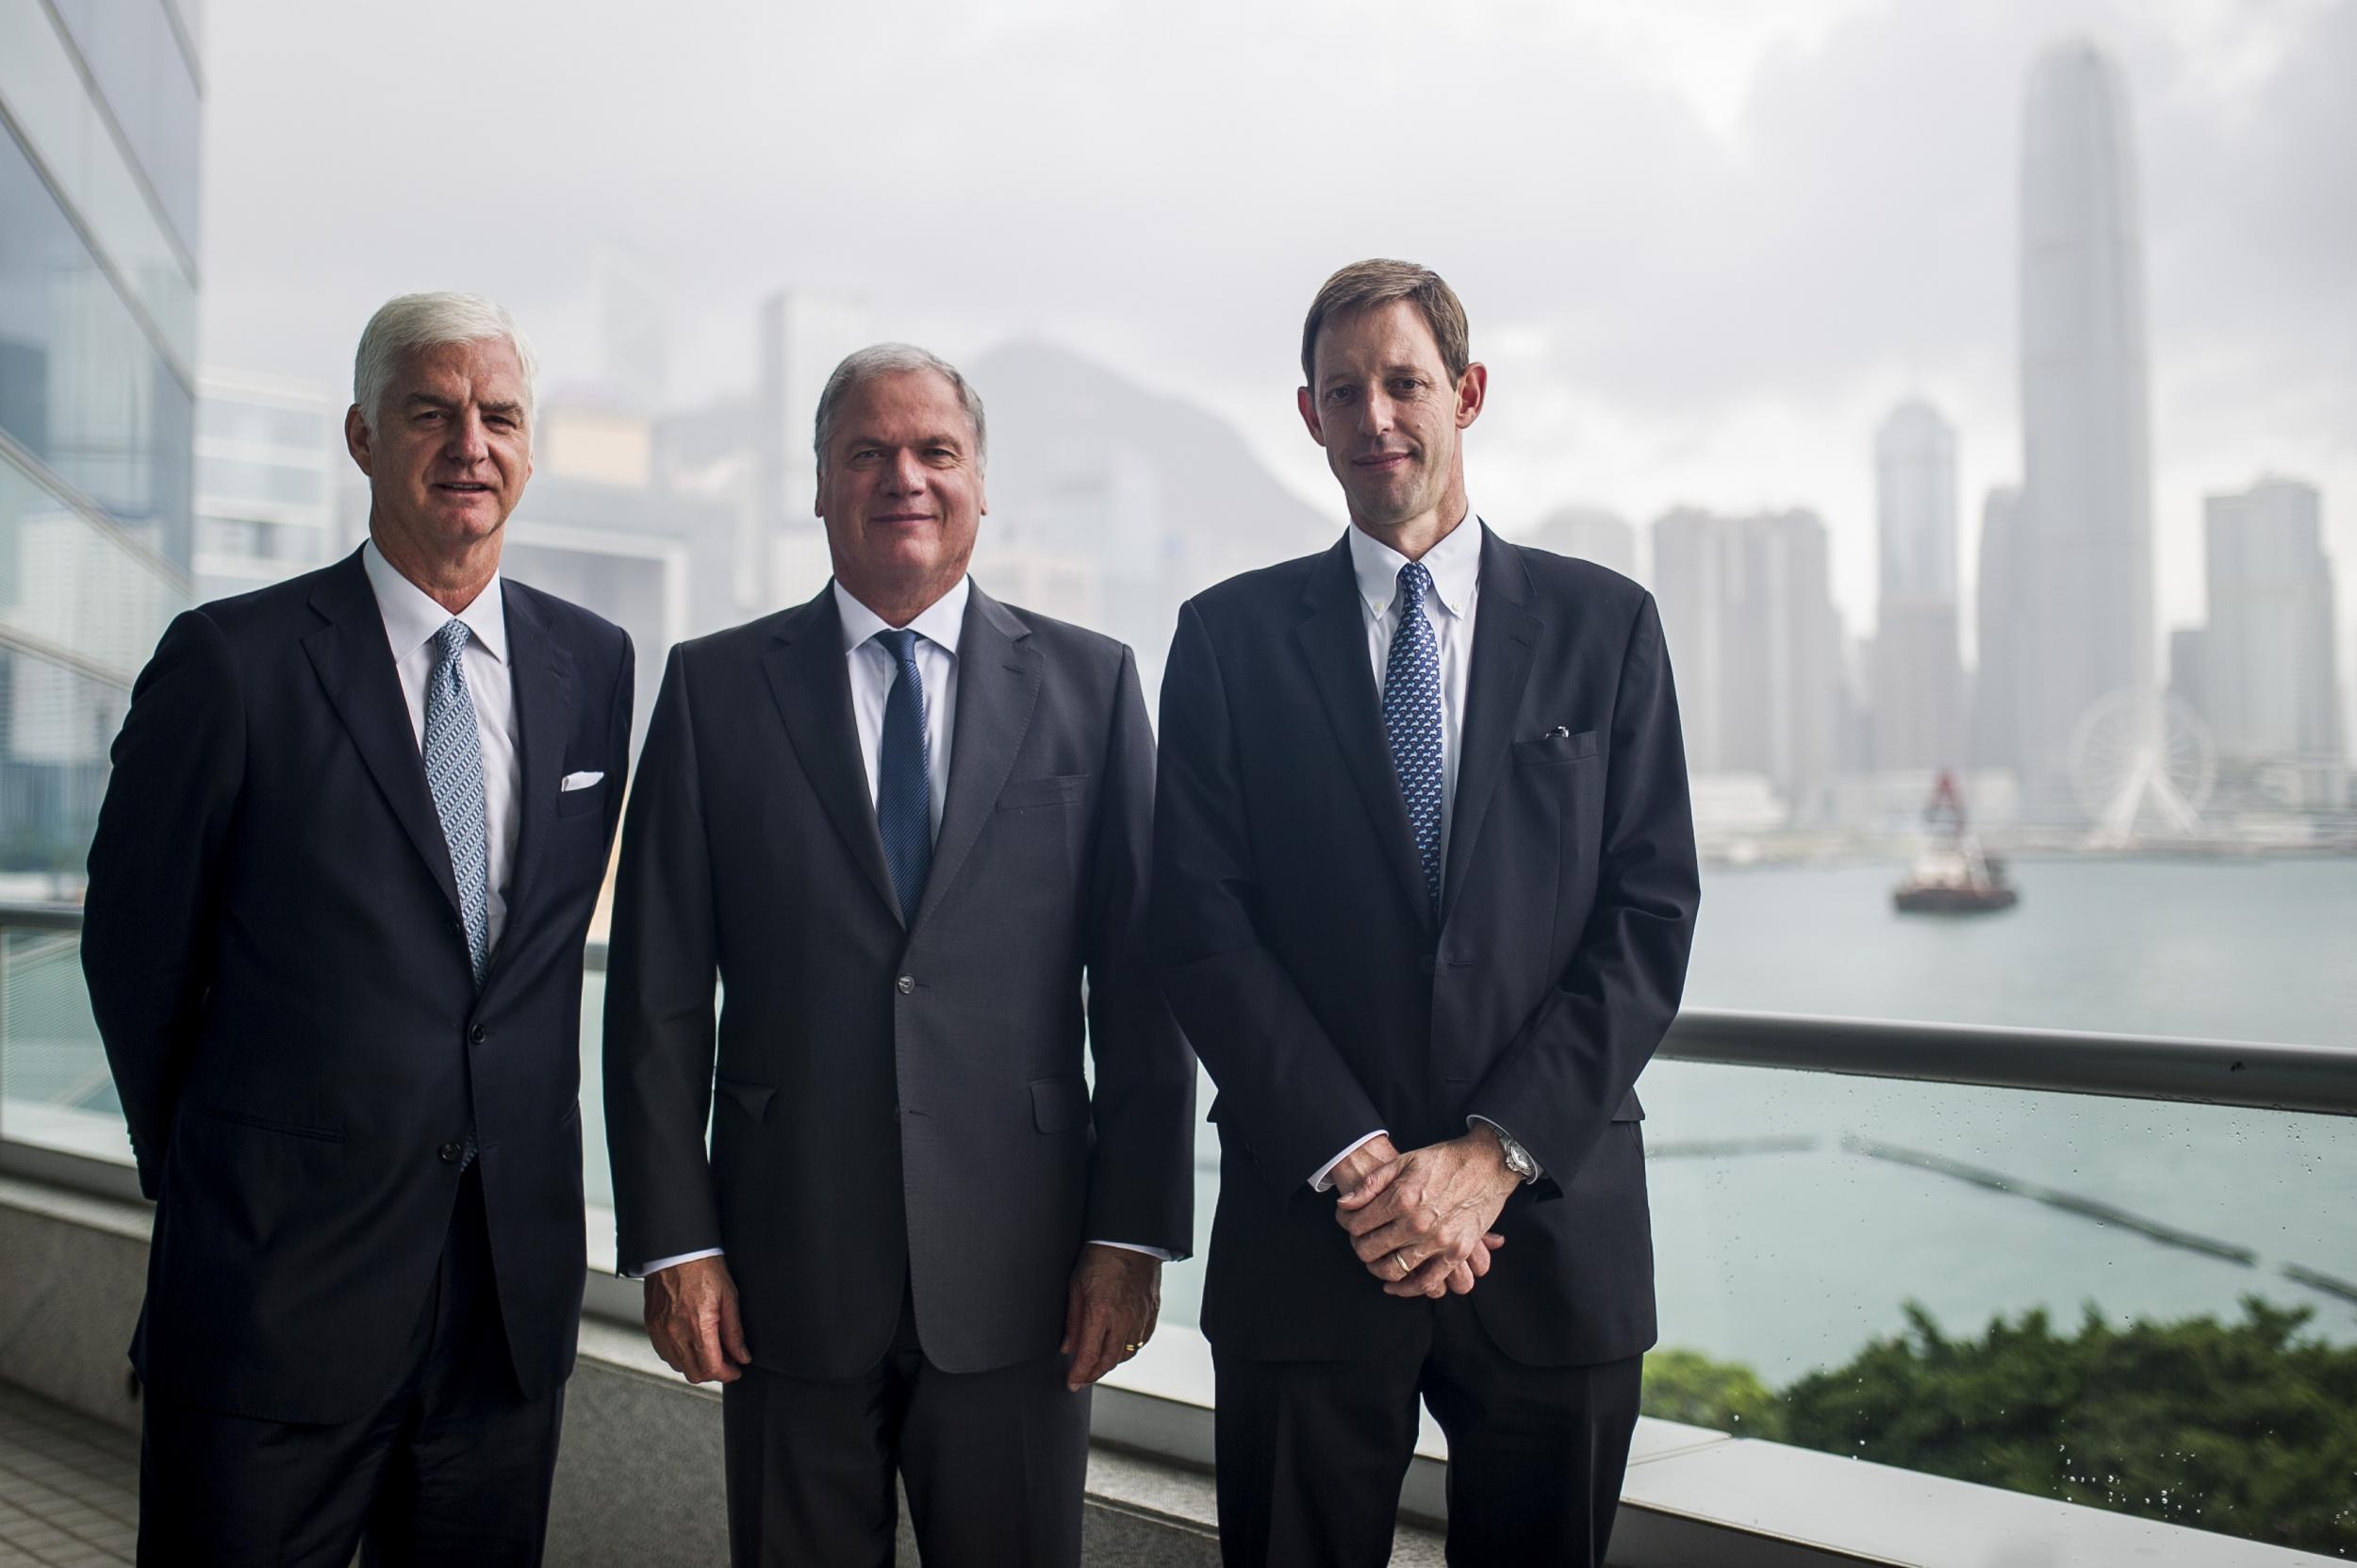 De Beers Forevermark CEO Stephen Lussier (L), De Beers CEO Philippe Mellier (C) and De Beers Executive Head of Strategy and Corporate Affairs Bruce Cleaver (R)